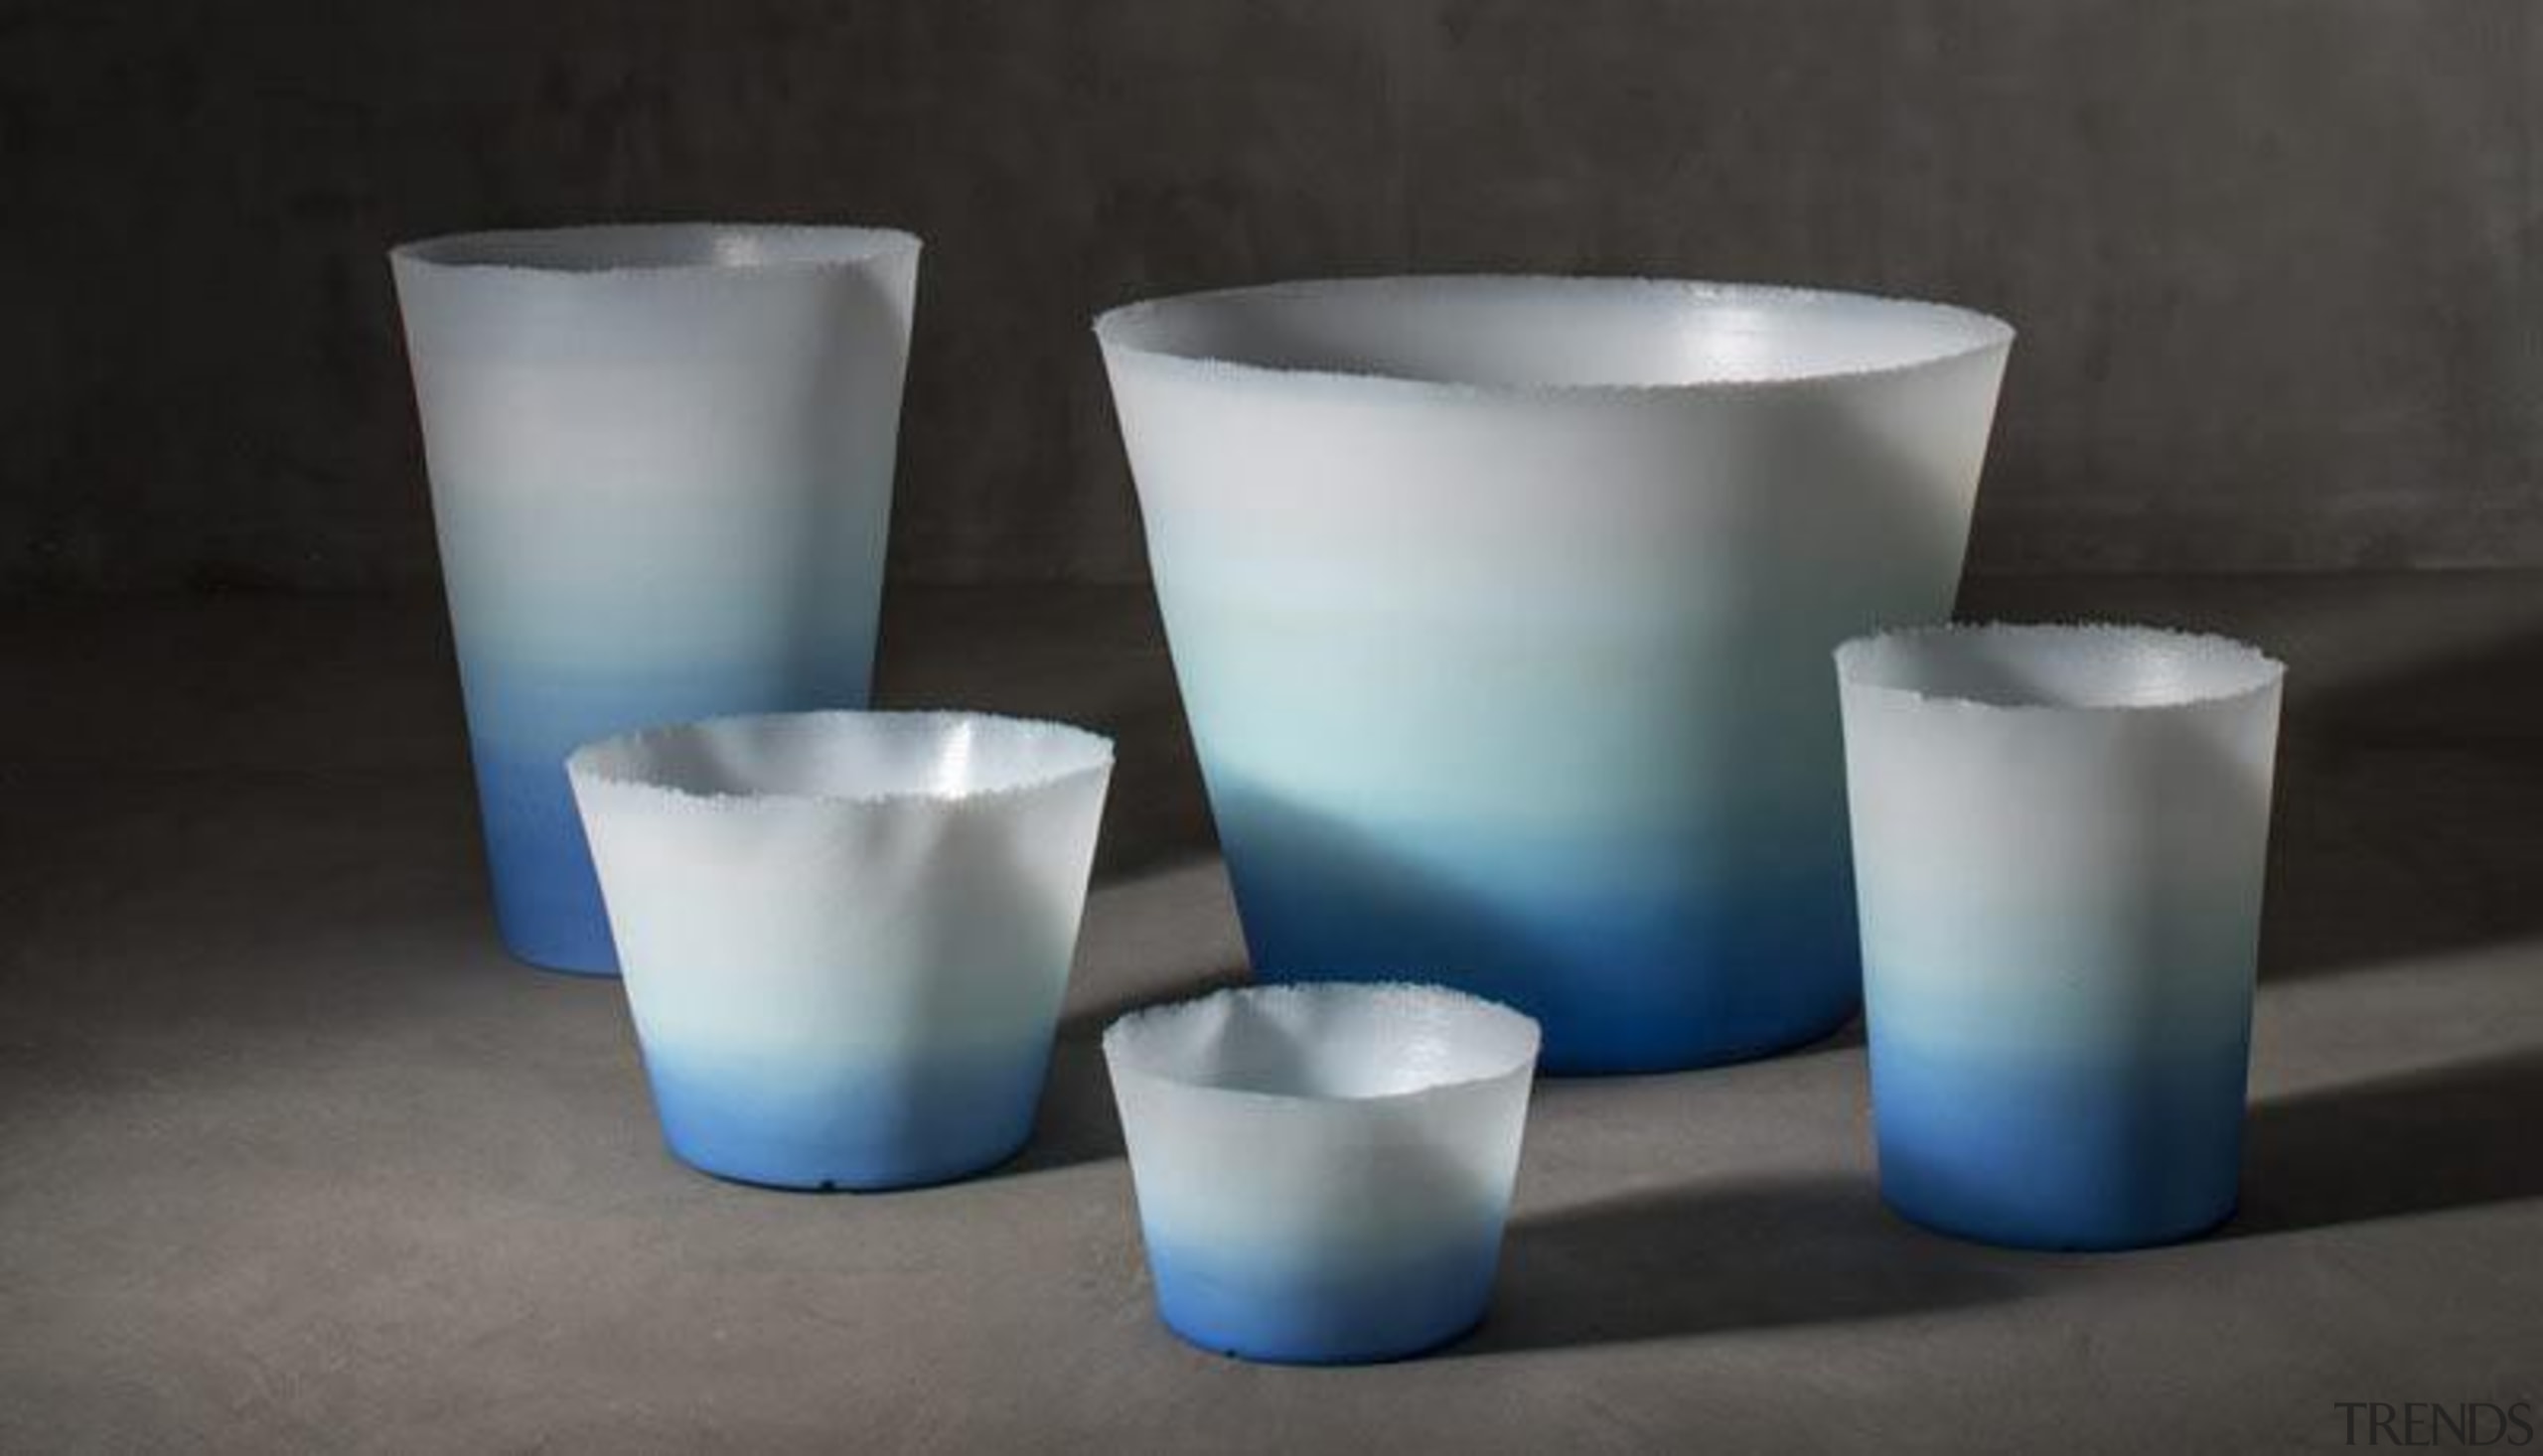 There’s a whole spectrum of colour to enjoy ceramic, glass, lighting, product, black, gray